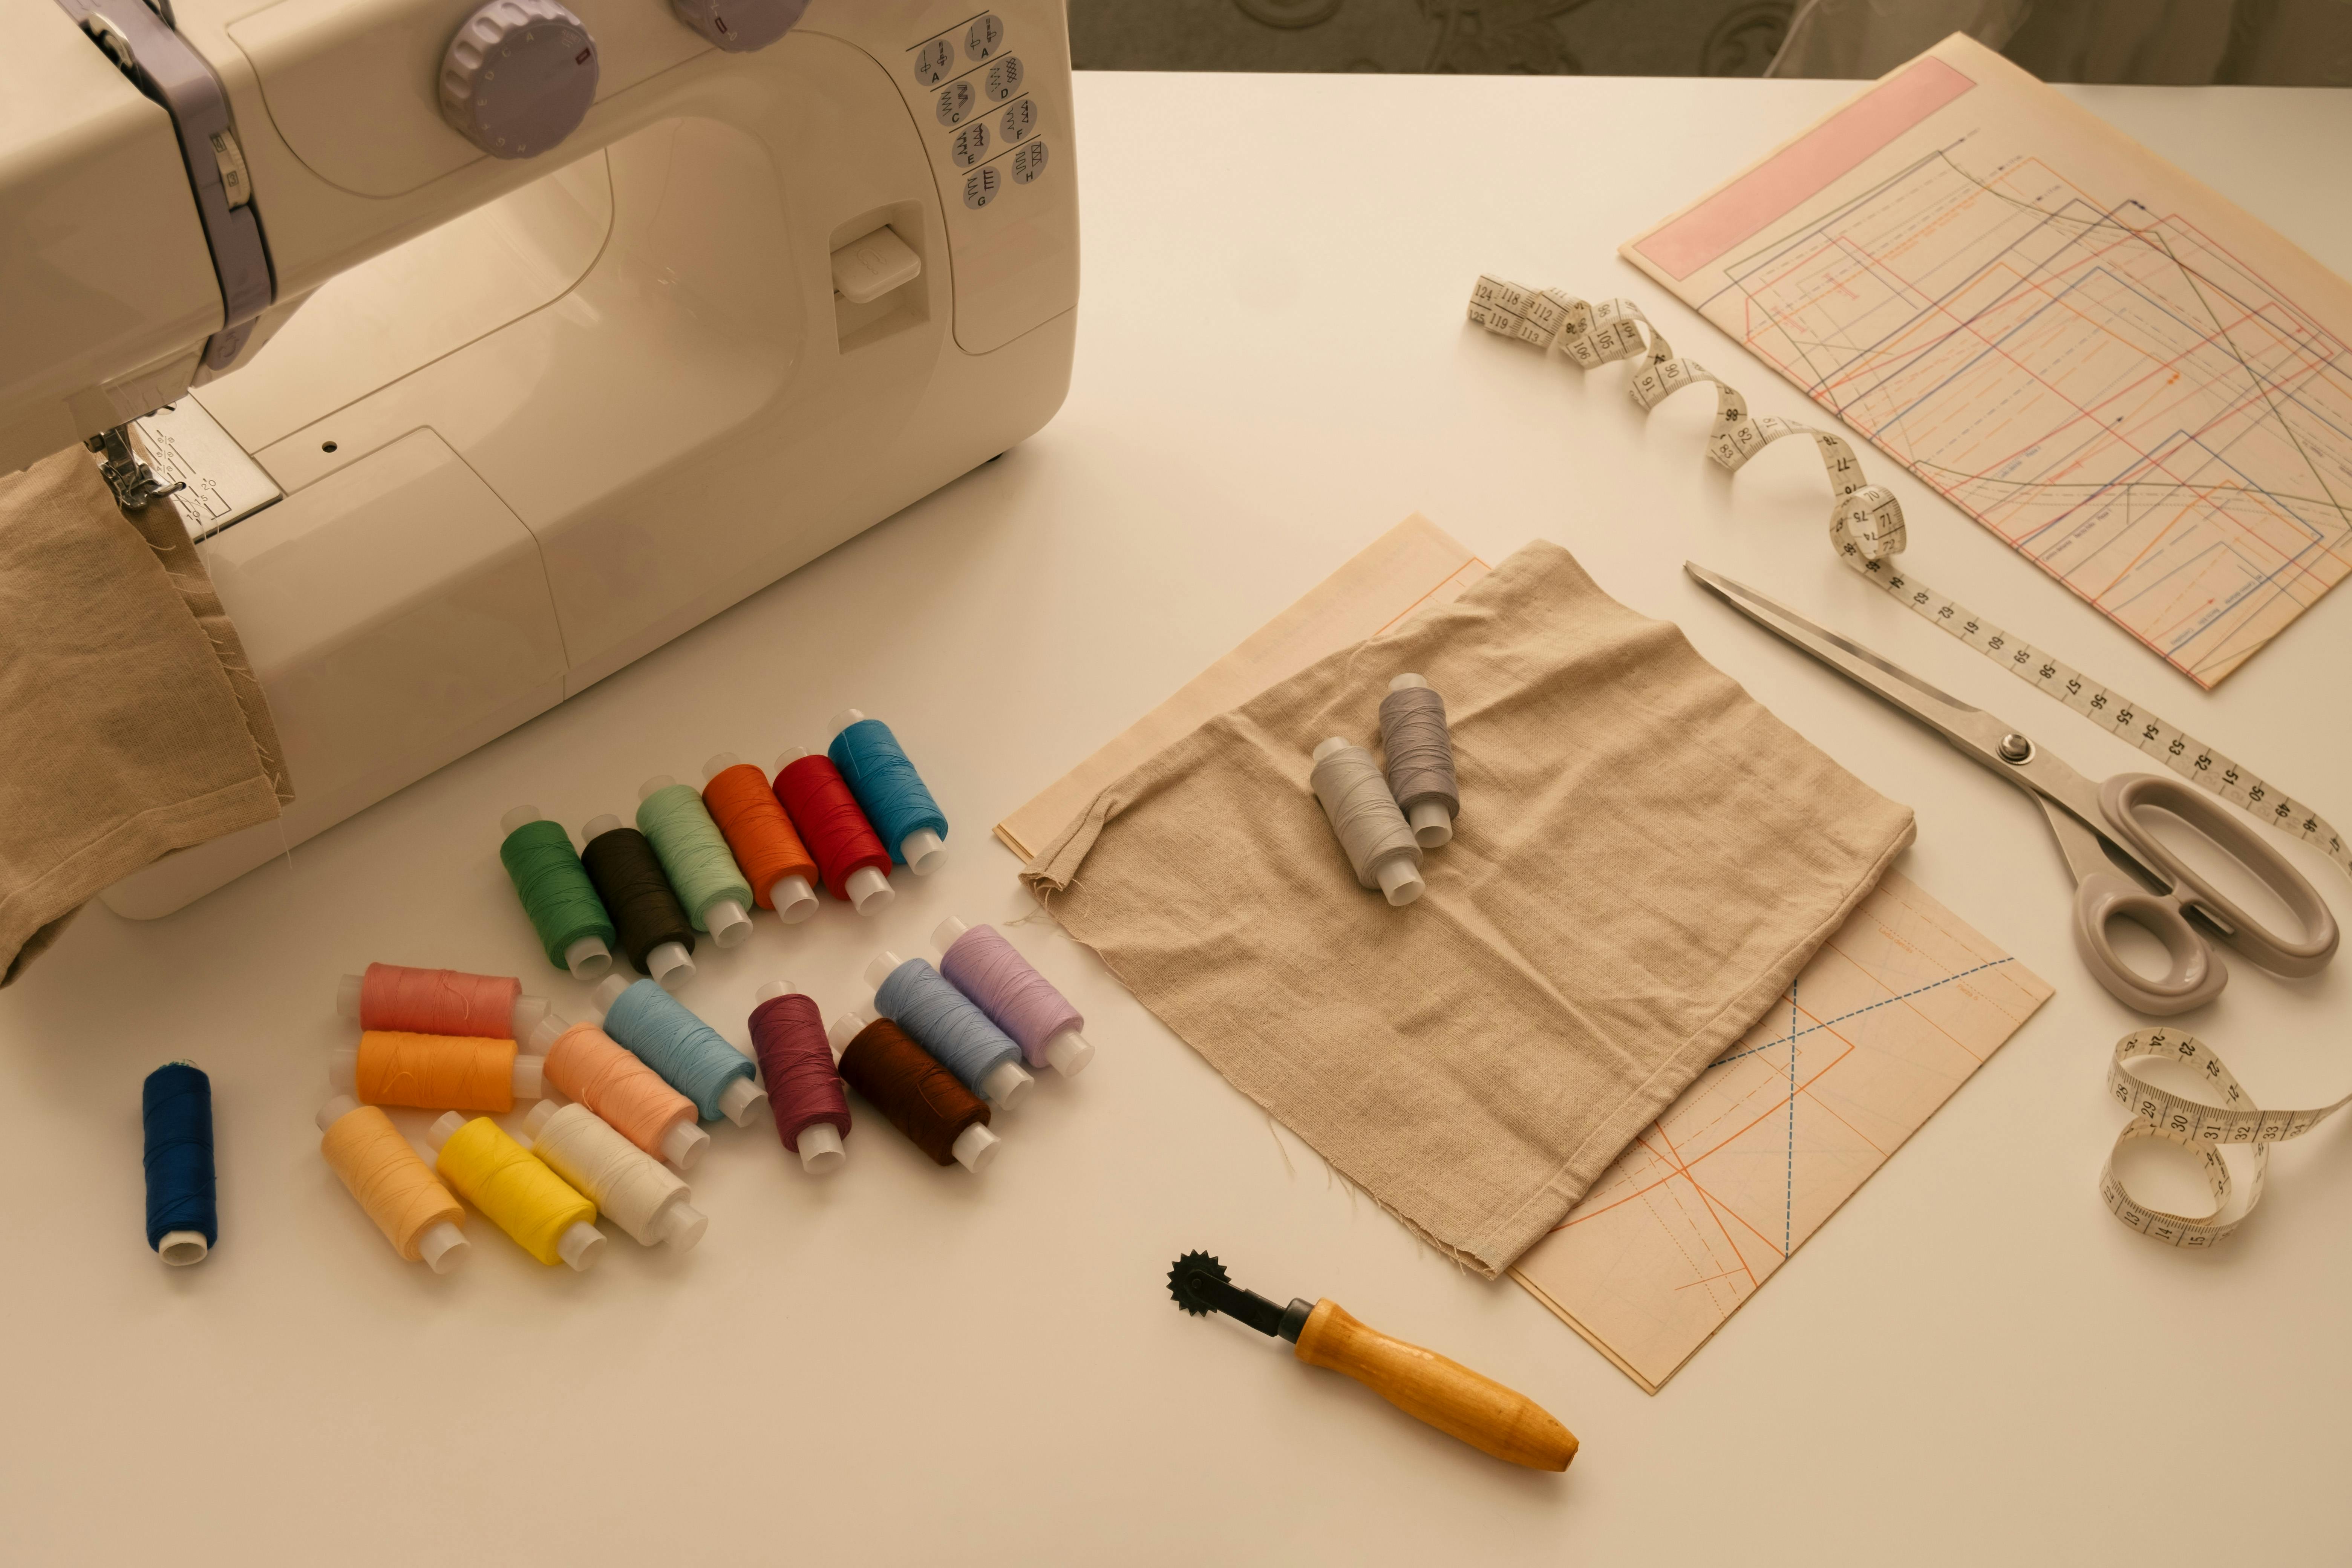  photo of sewing machine with sewing tools like thread and scissors